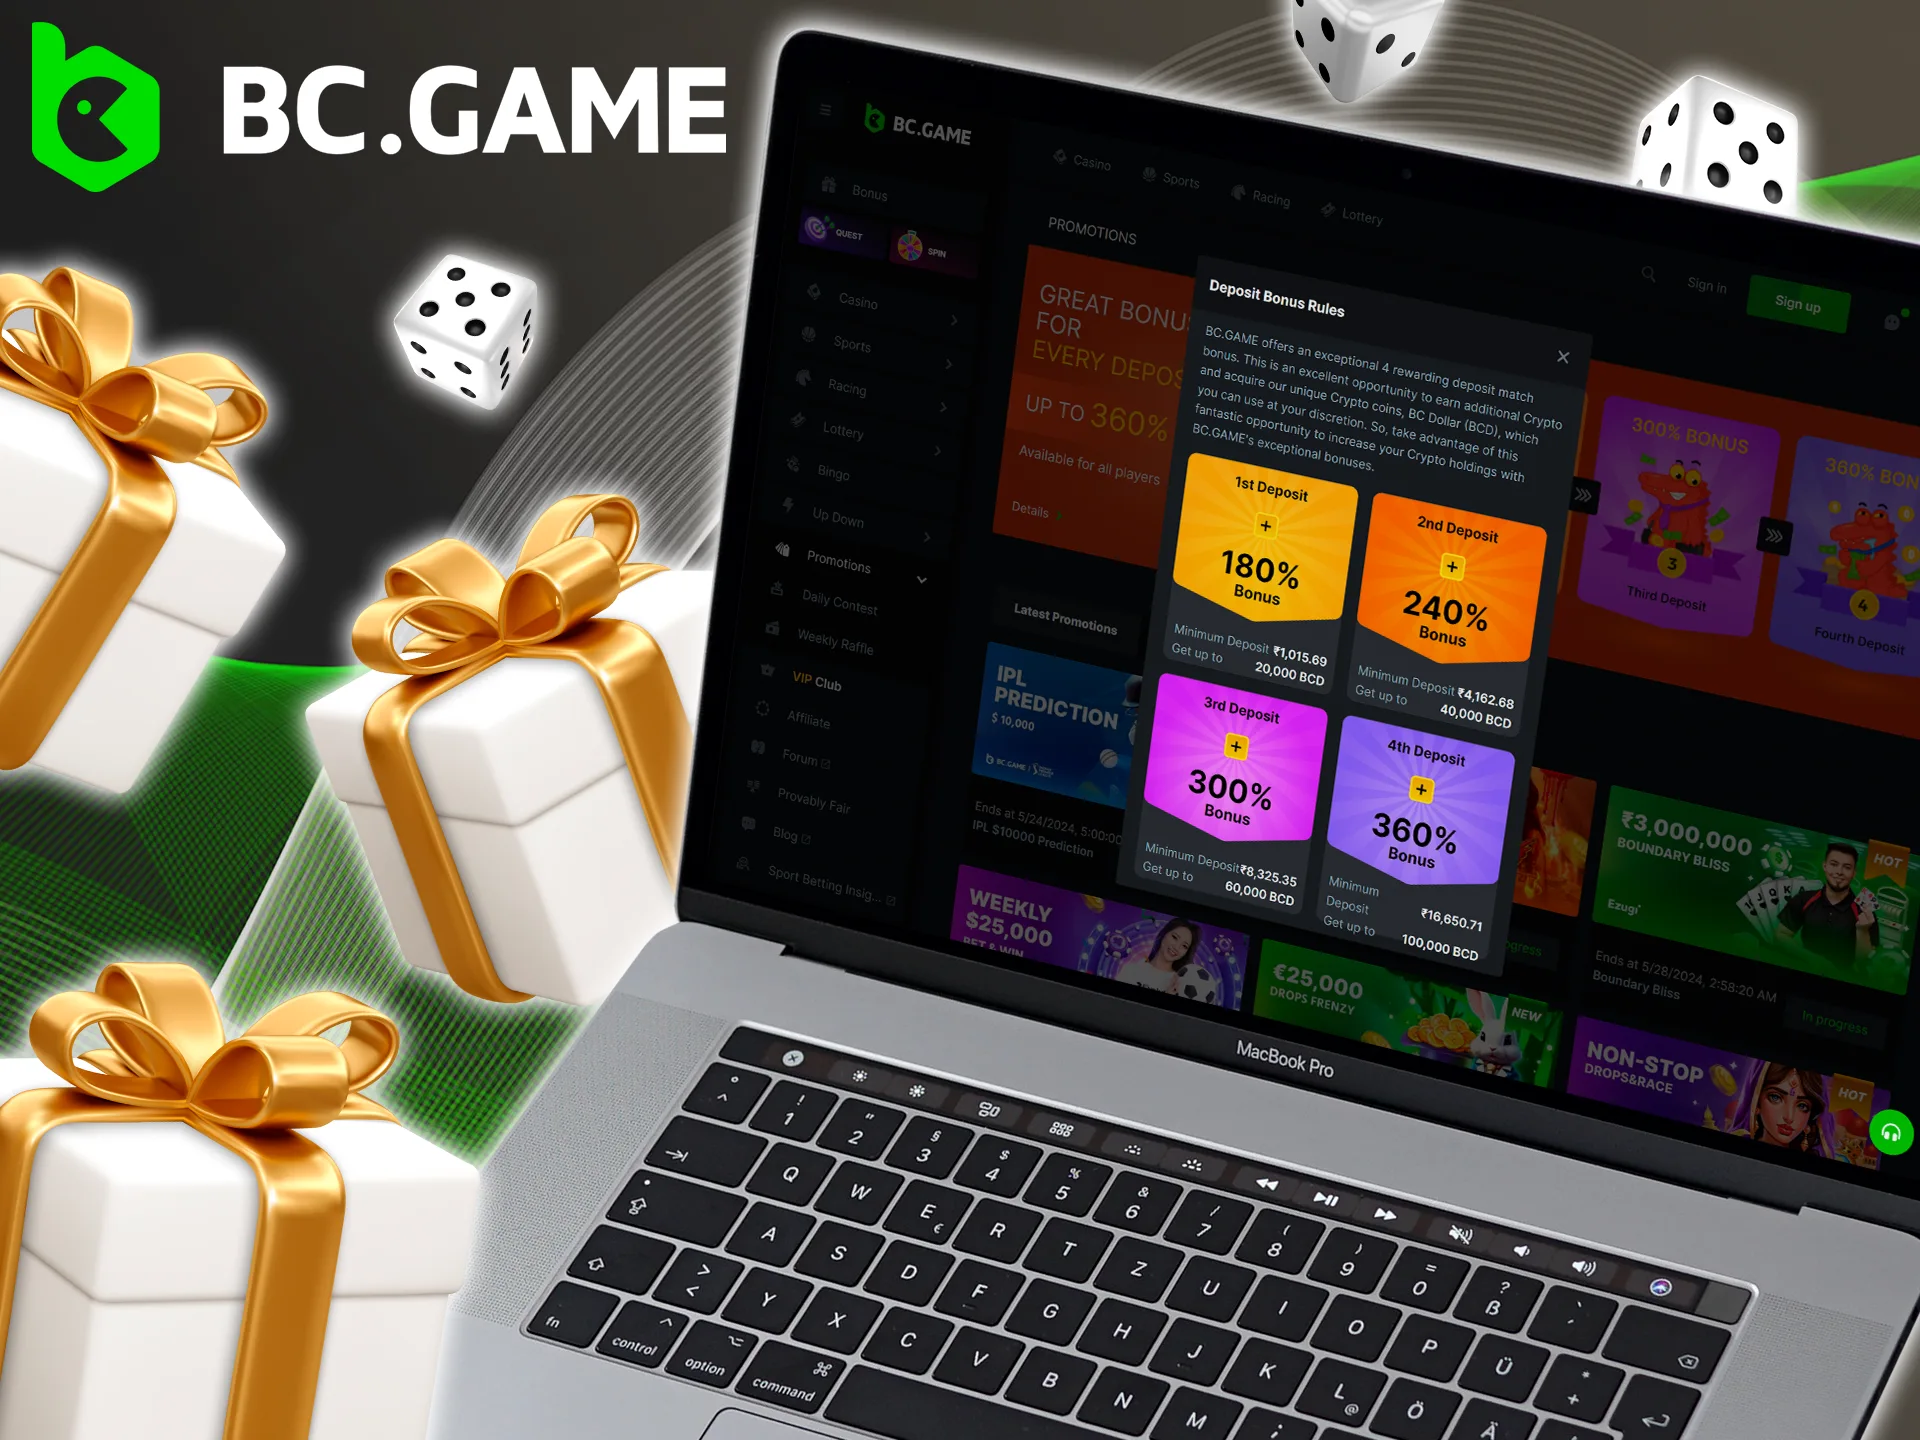 Get the BC Game welcome bonus and play Classic Dice without risk.